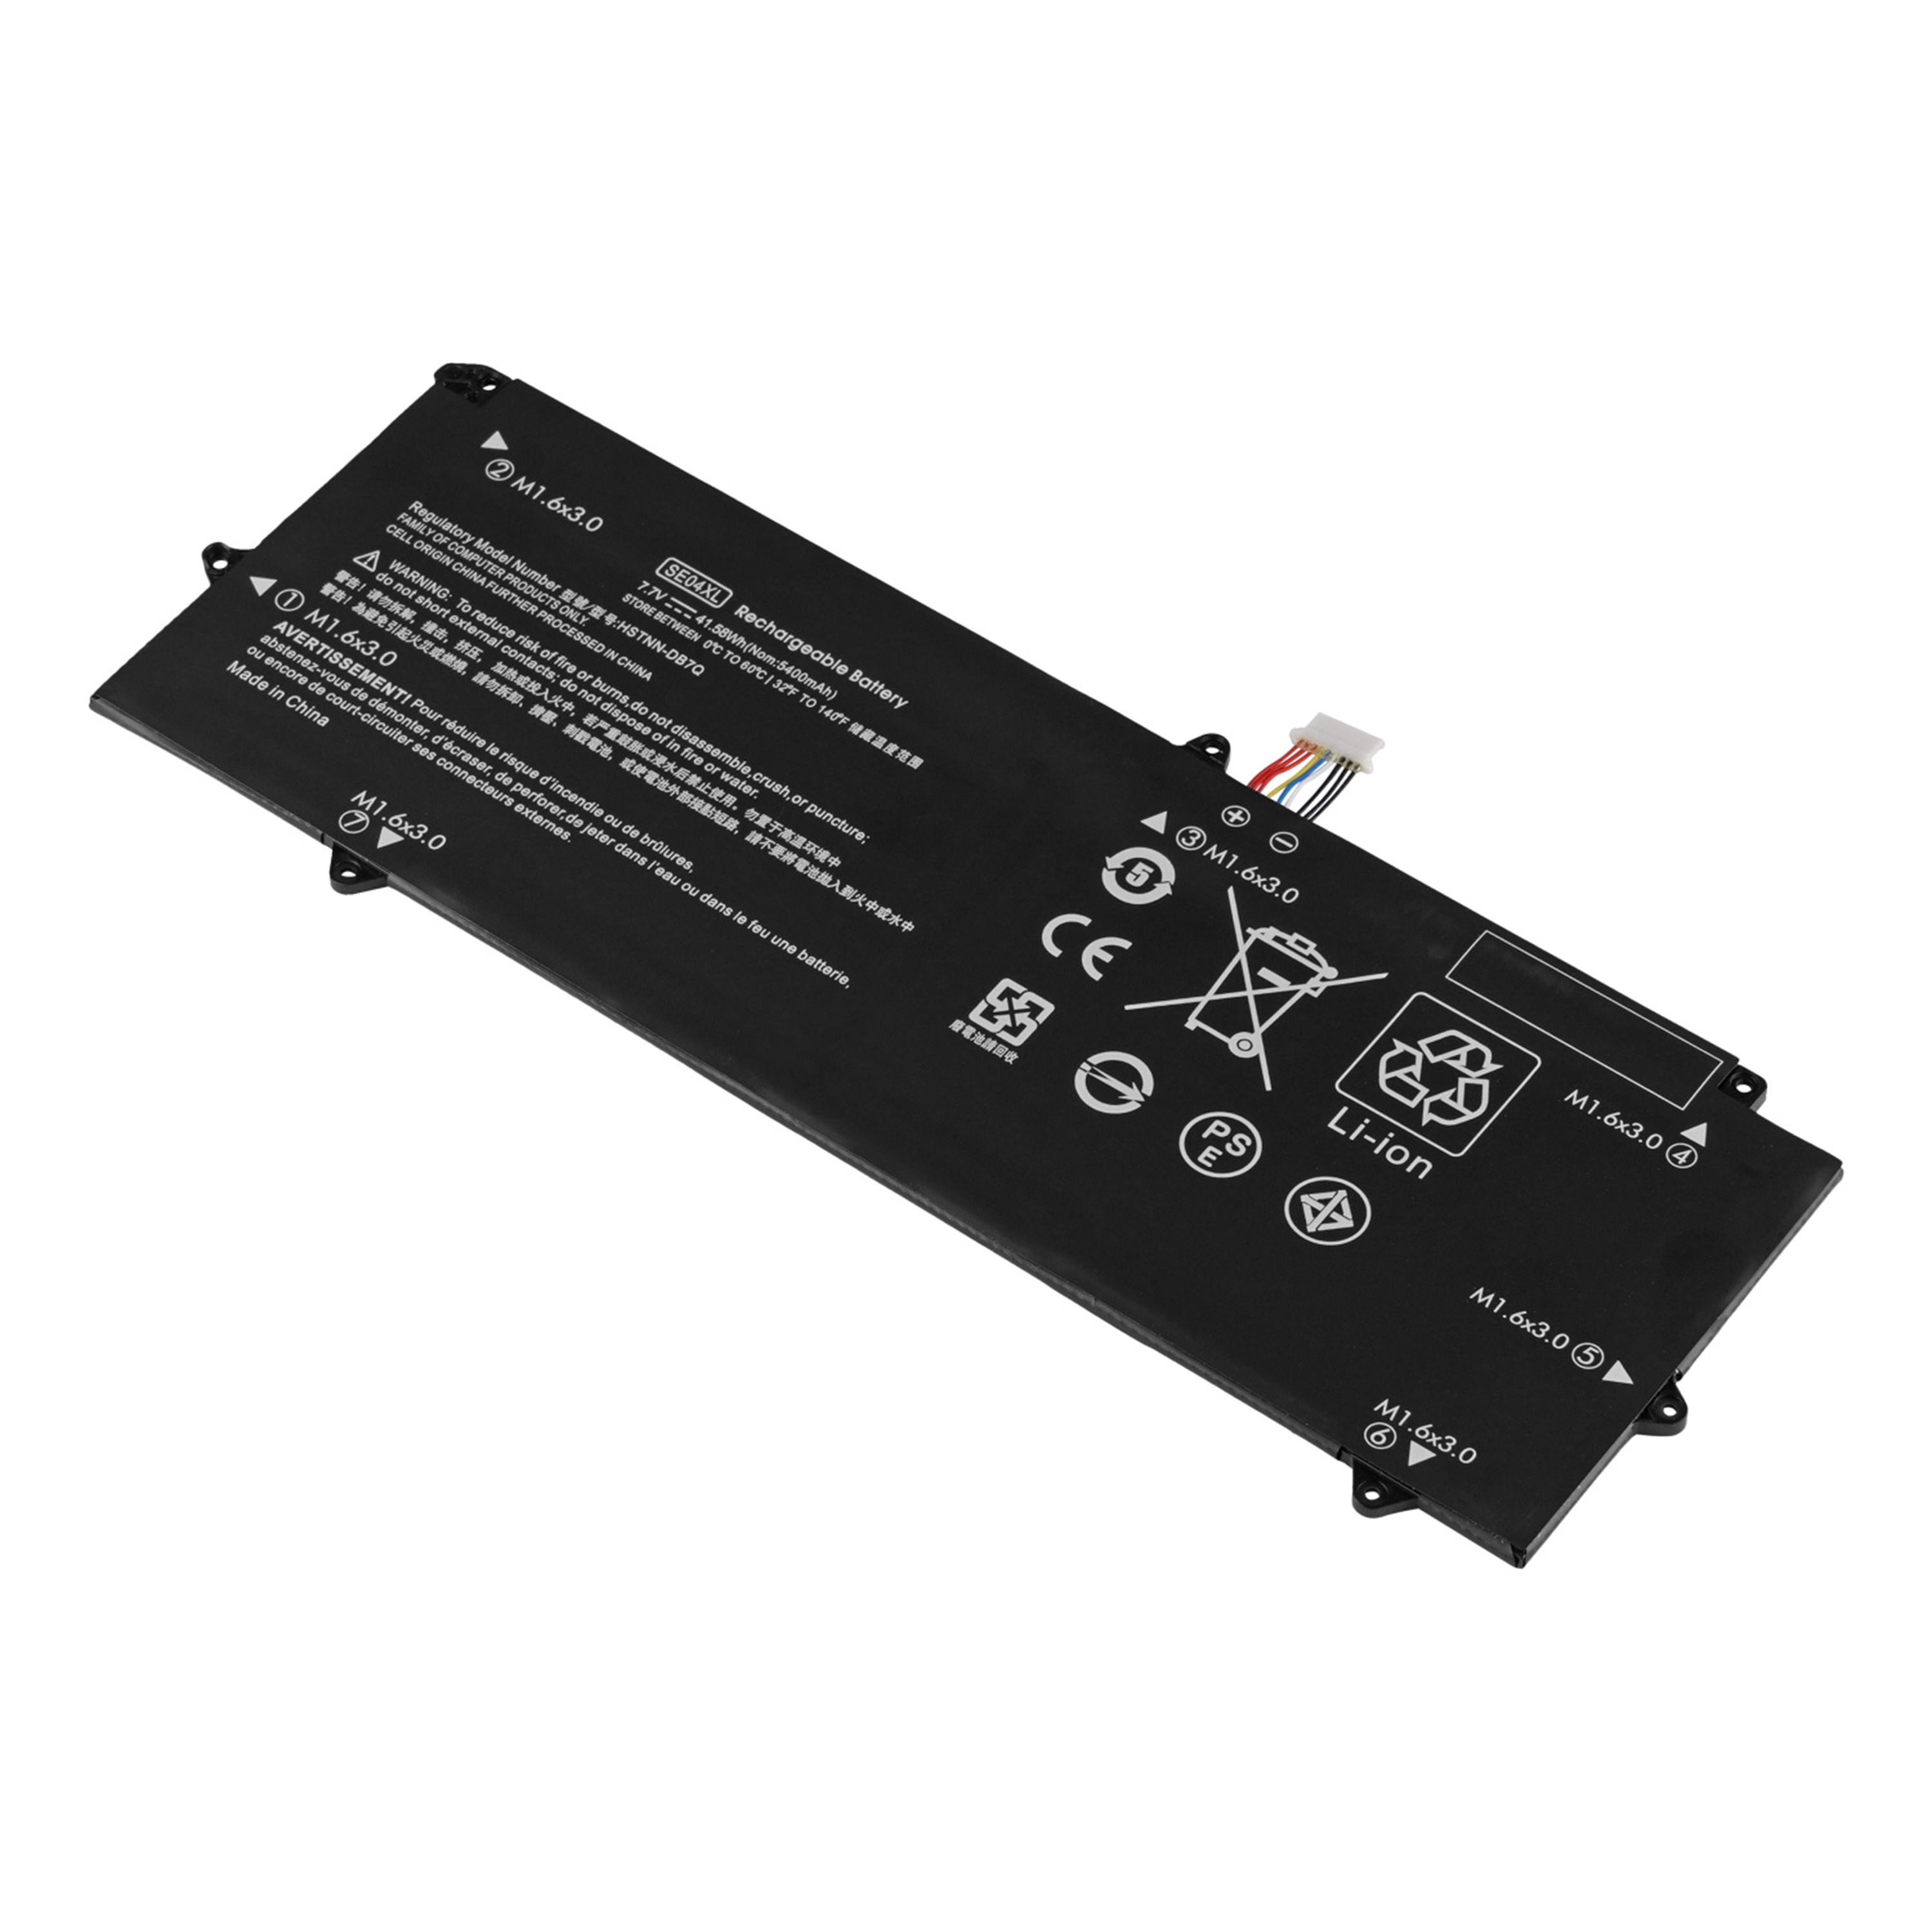 SE04XL rechargeable lithium ion Notebook battery Laptop battery For HP Pro X2 612 G2 Tablet 860708-855 860724-2B1 860724-2C1 HSTNN-DB7Q DWO Manufacturer 7.7V 41.58Wh 5400mAh 4cell